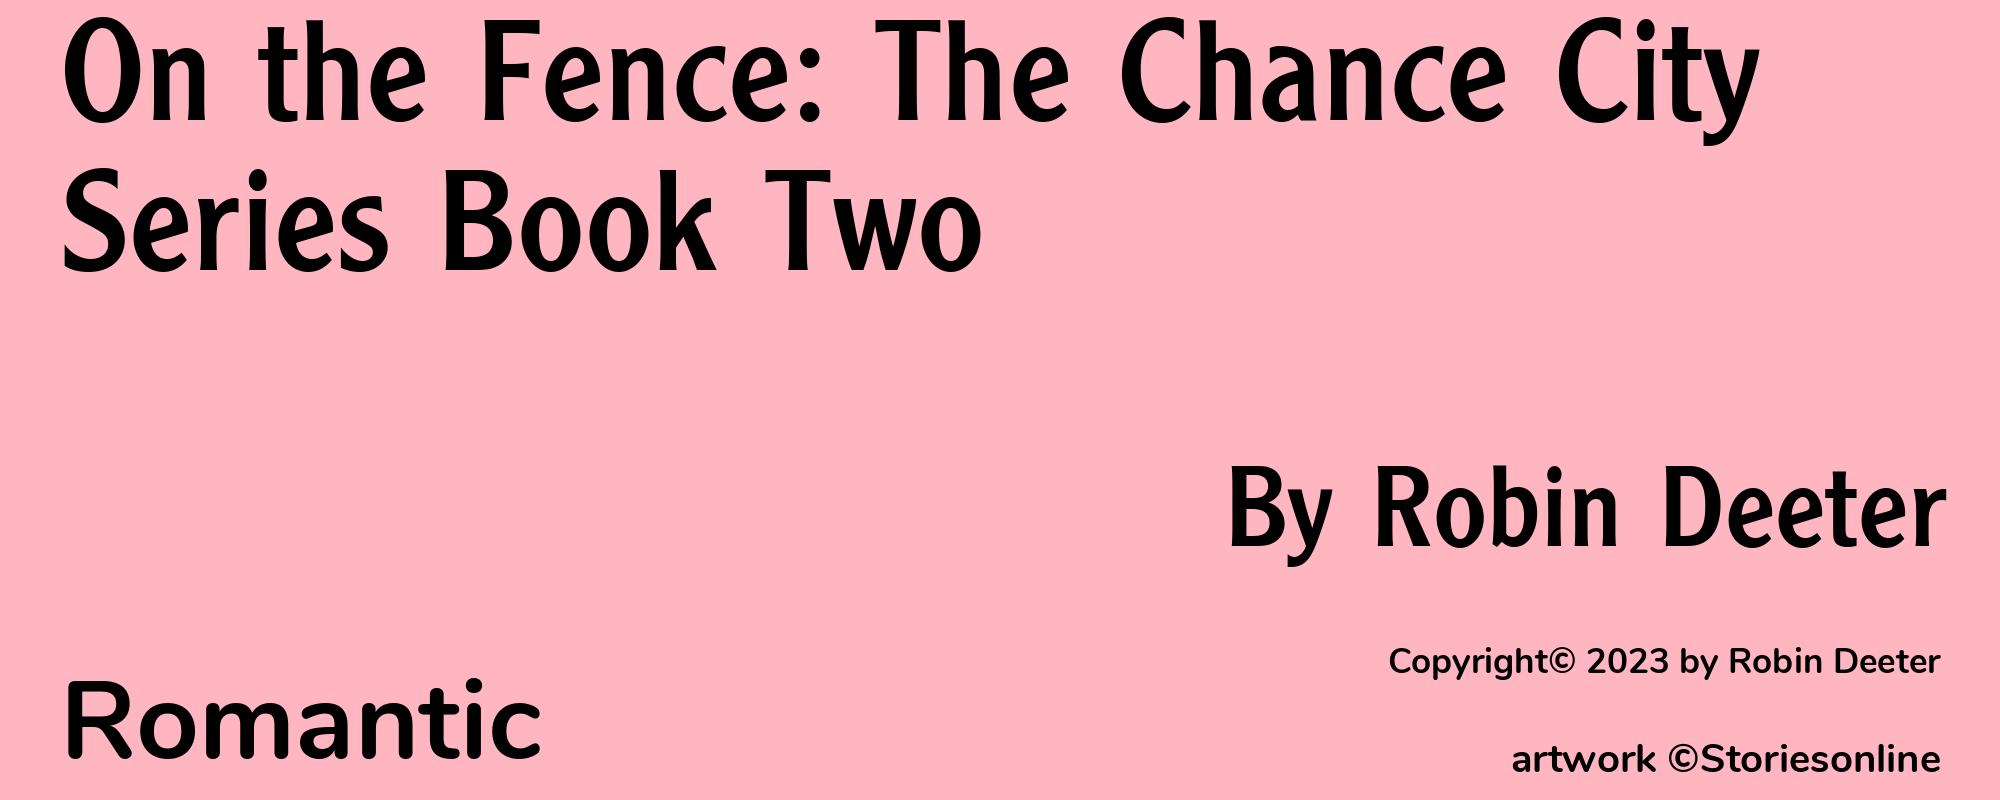 On the Fence: The Chance City Series Book Two - Cover